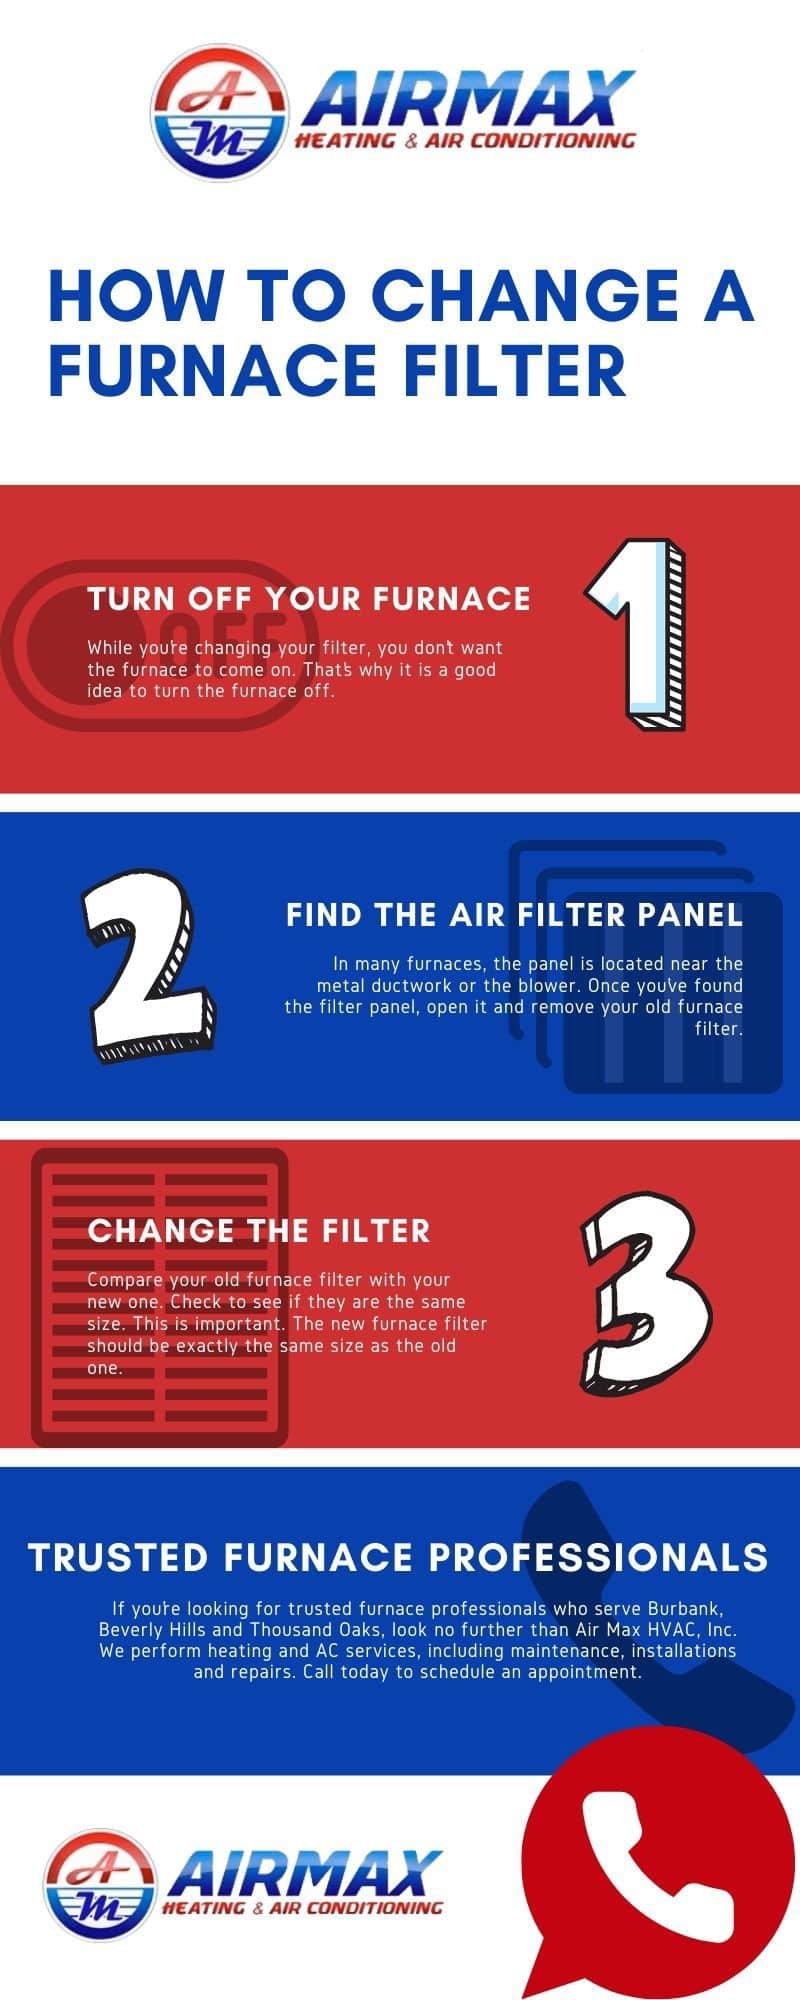 How to change a furnace filter